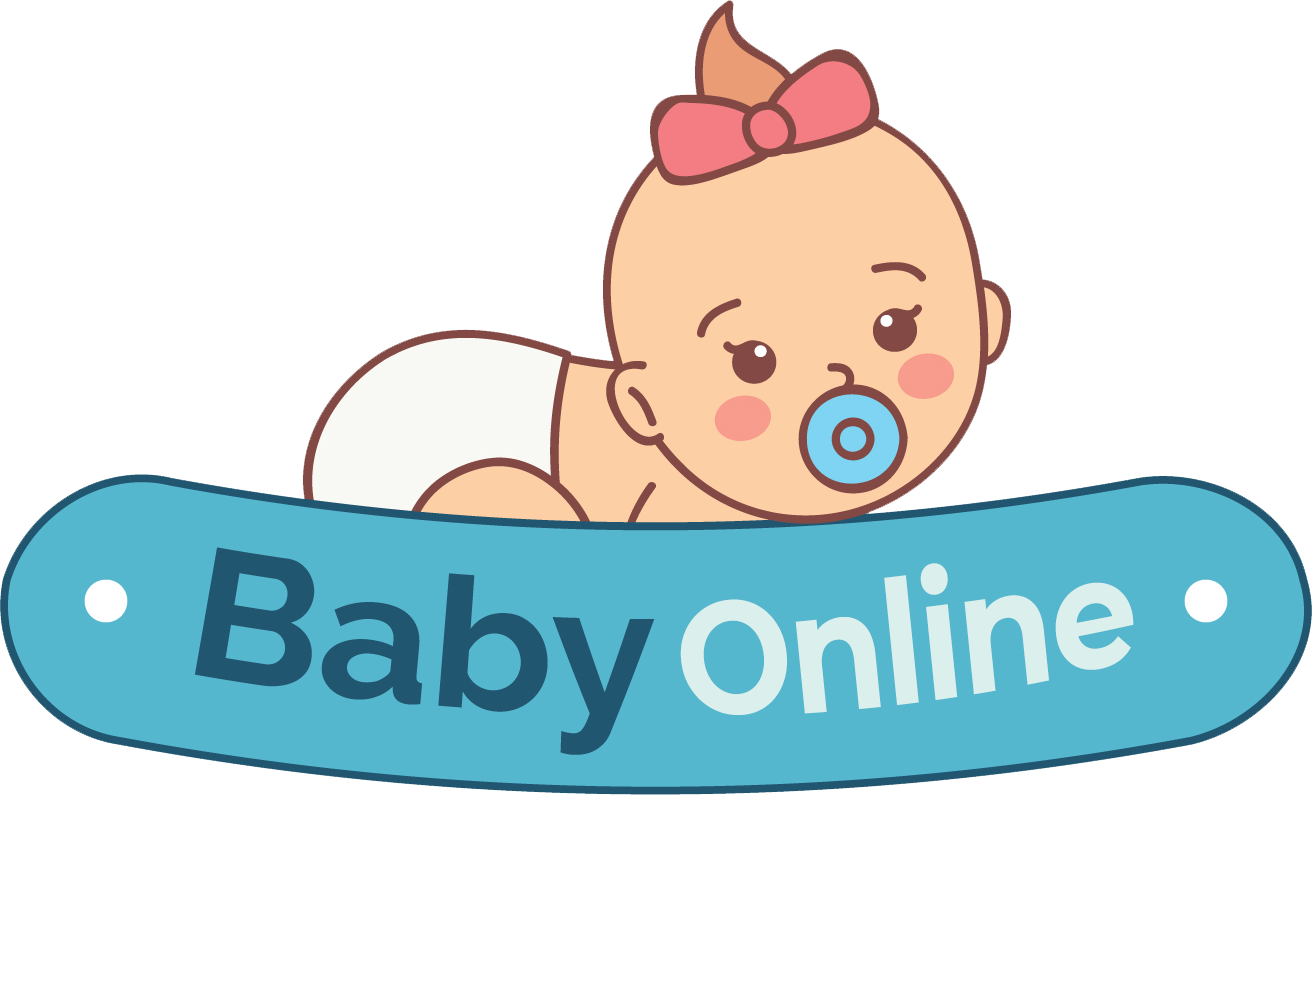 Baby Online Shopping – Newborn, Baby & Kids, Mom Products